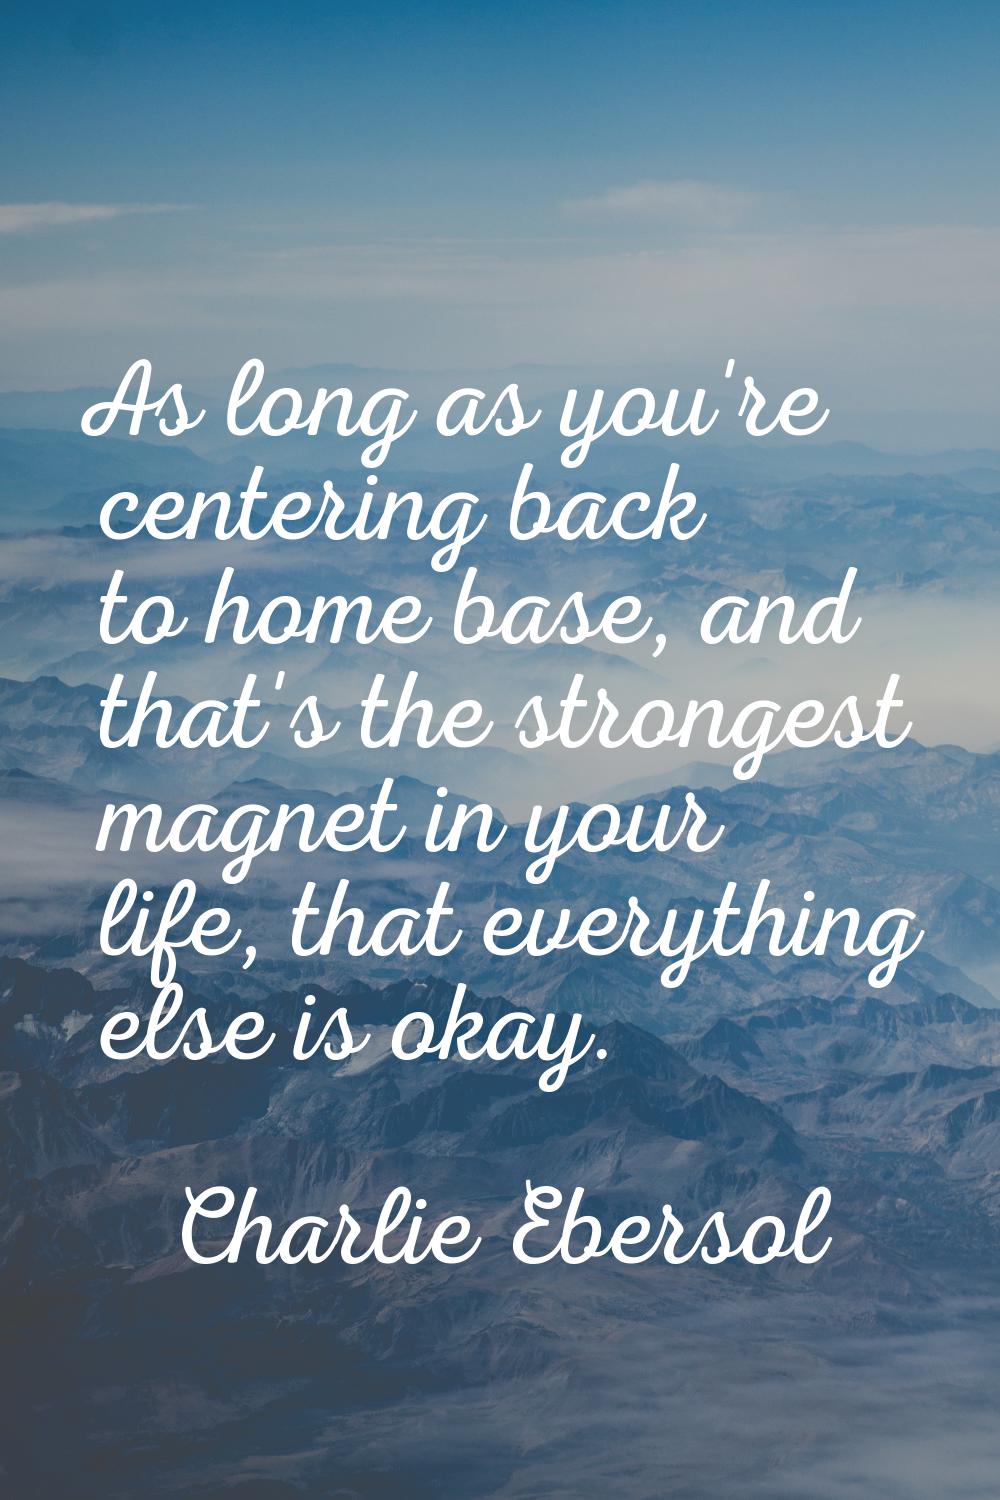 As long as you're centering back to home base, and that's the strongest magnet in your life, that e